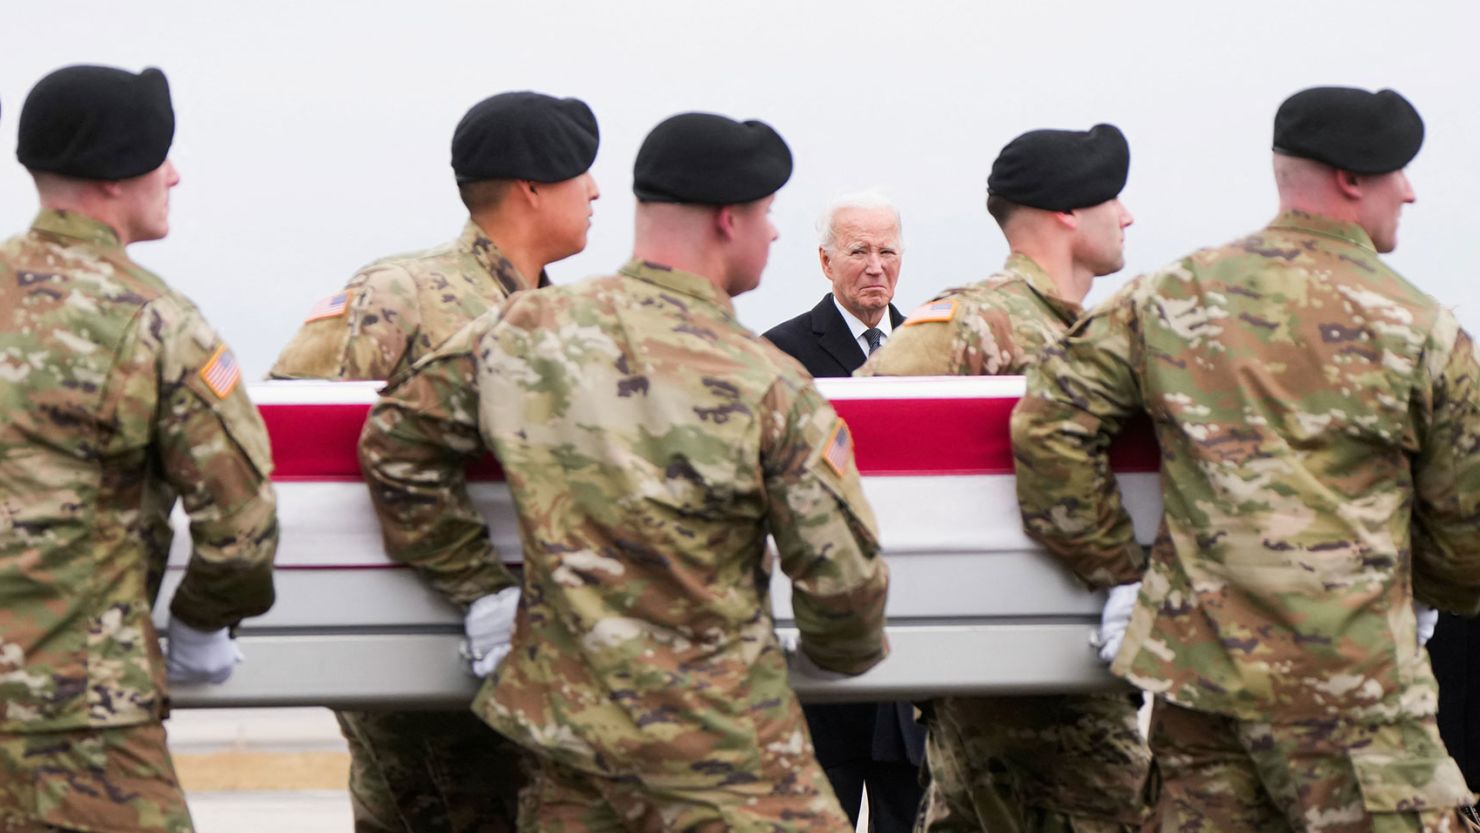 President Joe Biden and Secretary of Defense Lloyd J. Austin III attend the dignified transfer of the remains of Army Reserve Sergeants William Rivers, Kennedy Sanders and Breonna Moffett at Dover Air Force Base in Dover, Delaware, on February 2.